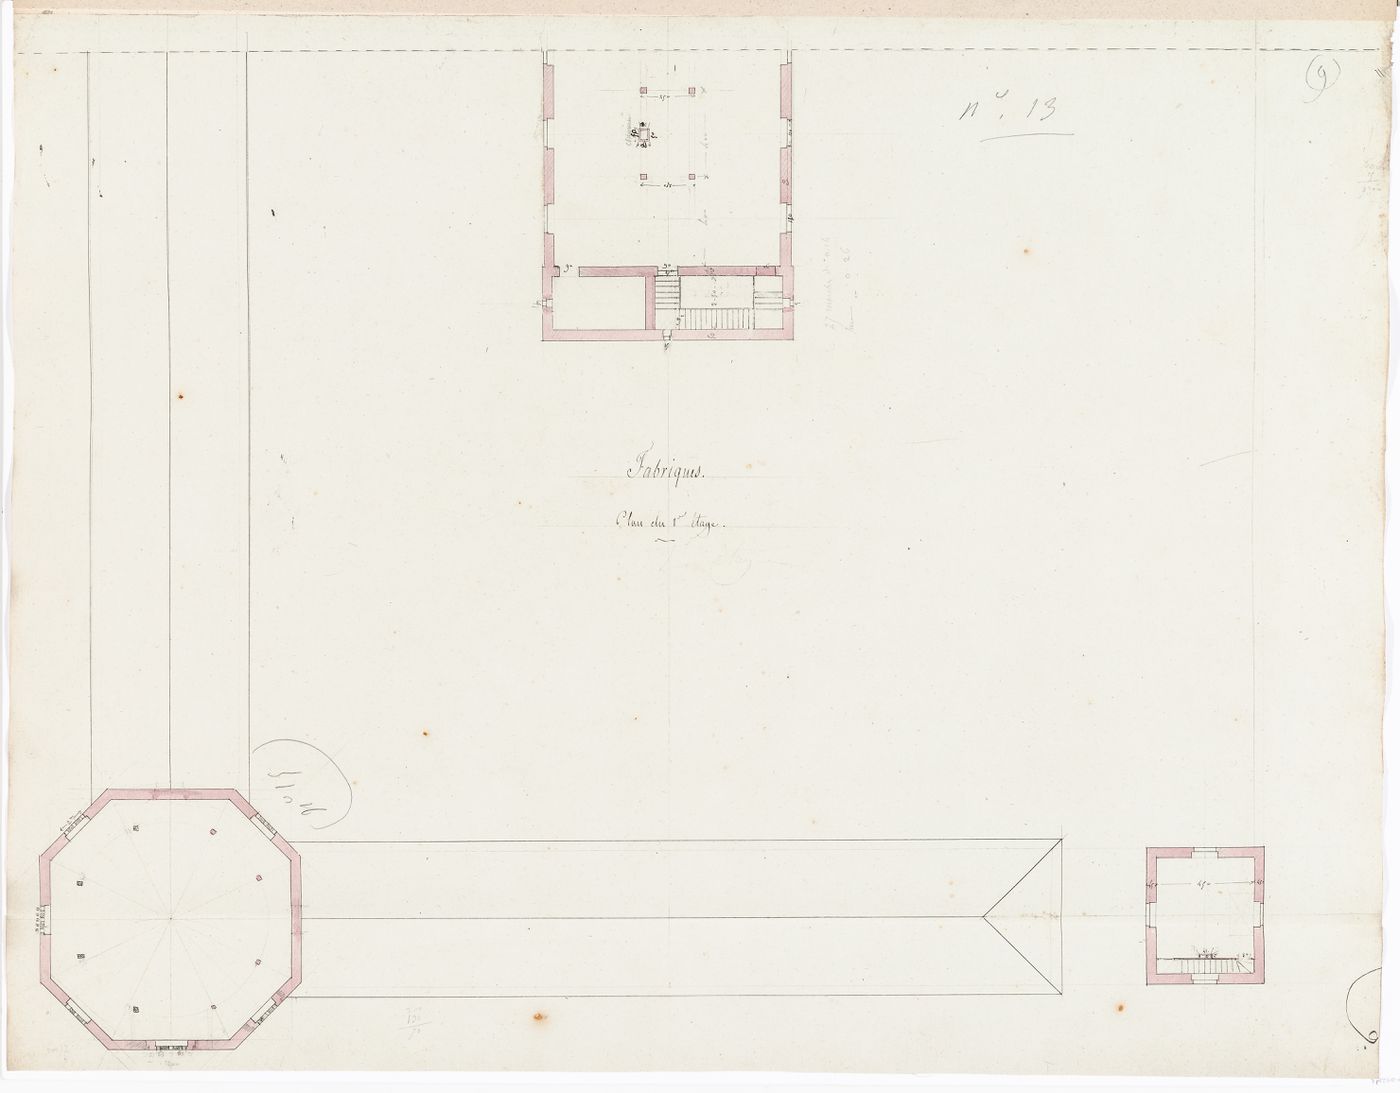 Project for Clos d'équarrissage, fôret de Bondy: First floor plan for the factory for the preservation of muscles